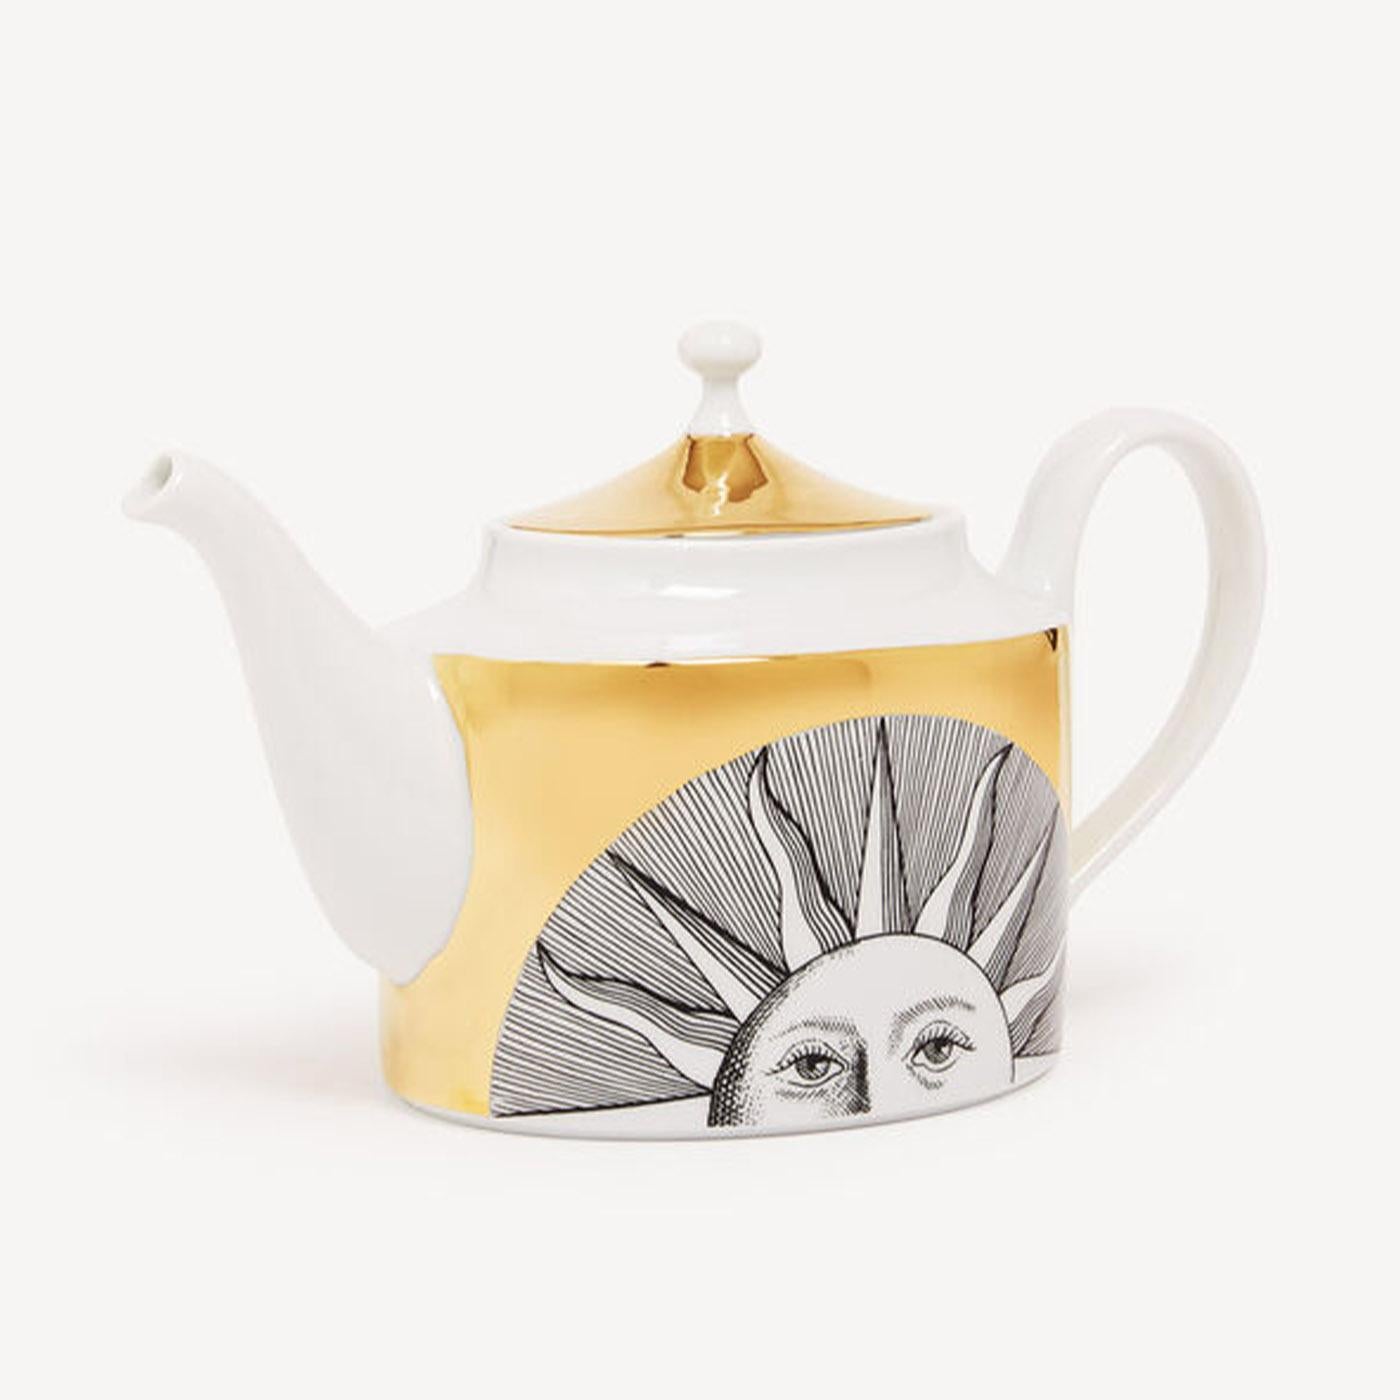 The motif of the sun covers this hand-decorated porcelain teapot with gold accents, transferring Fornasetti's imagery to an object for daily use and thereby transforming it into a collector's item. Any minor discrepancies between similar creations